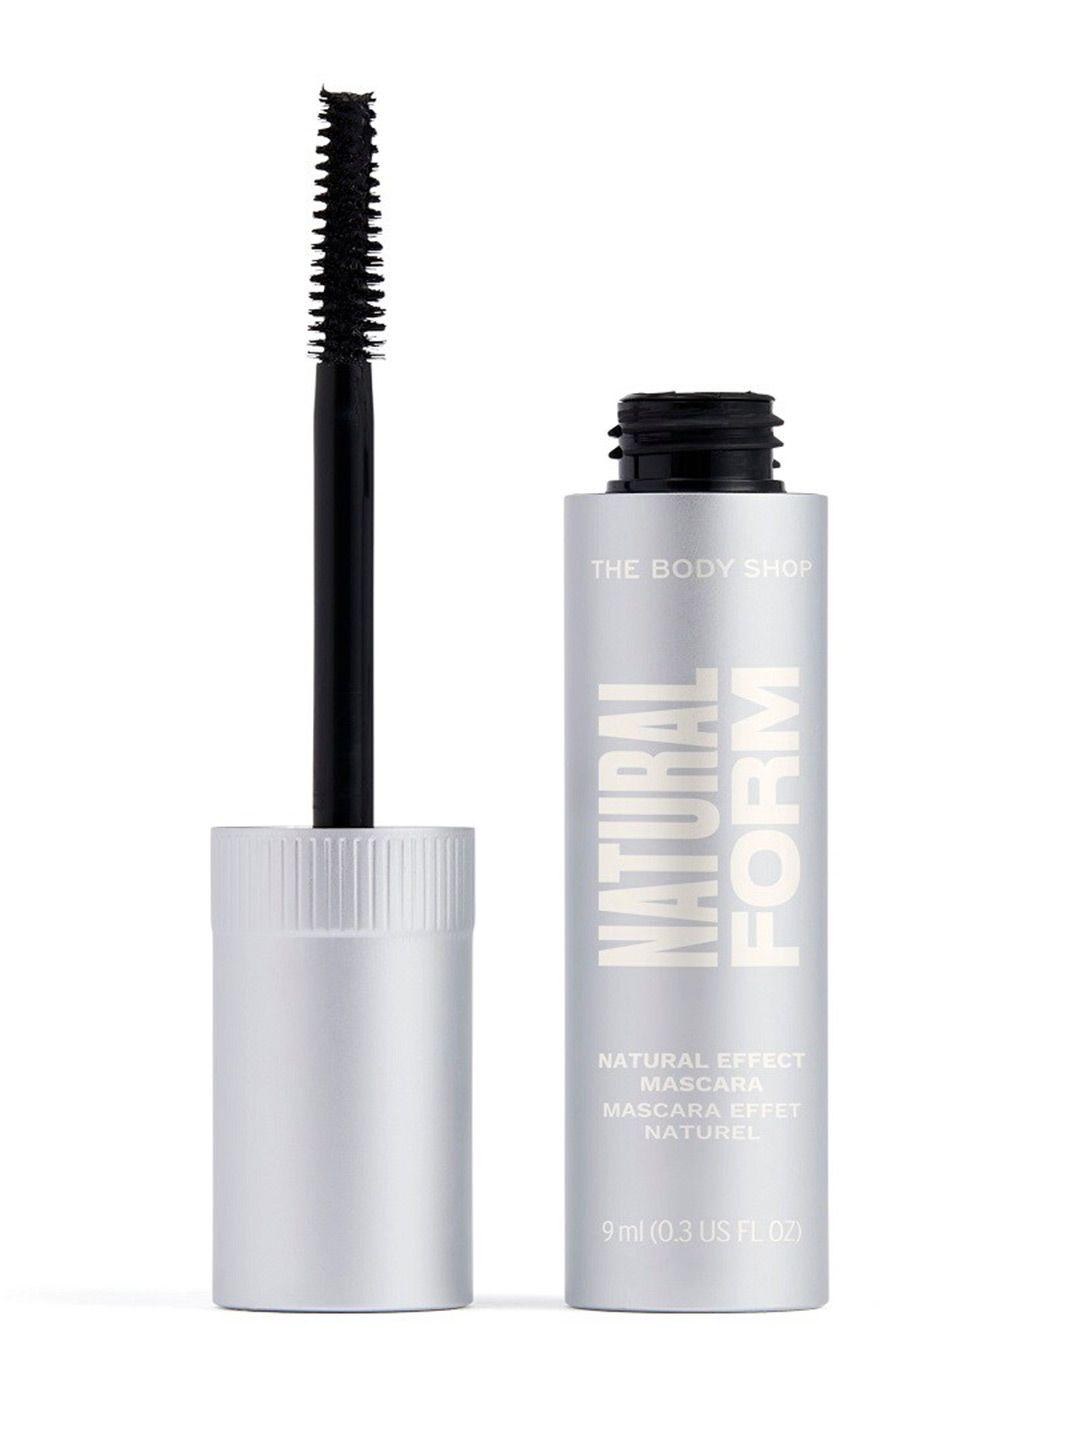 the-body-shop-natural-form-smudge-proof-natural-effect-mascara-9ml---black